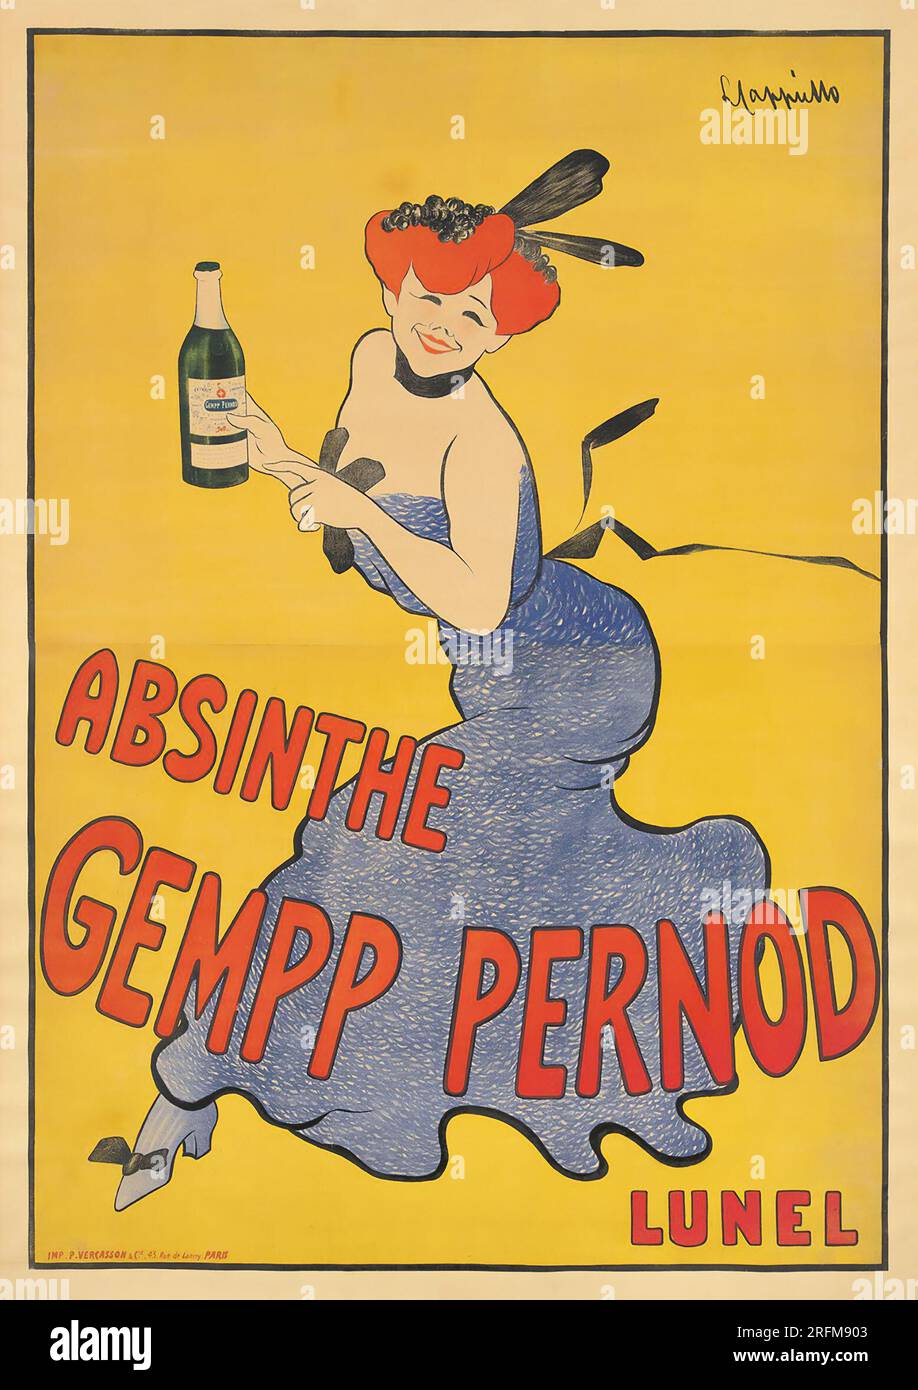 Absinthe, Gempp Pernod, Lunel - Vintage alcohol advertisement poster by Leonetto Cappiello, Paris 1903 Stock Photo